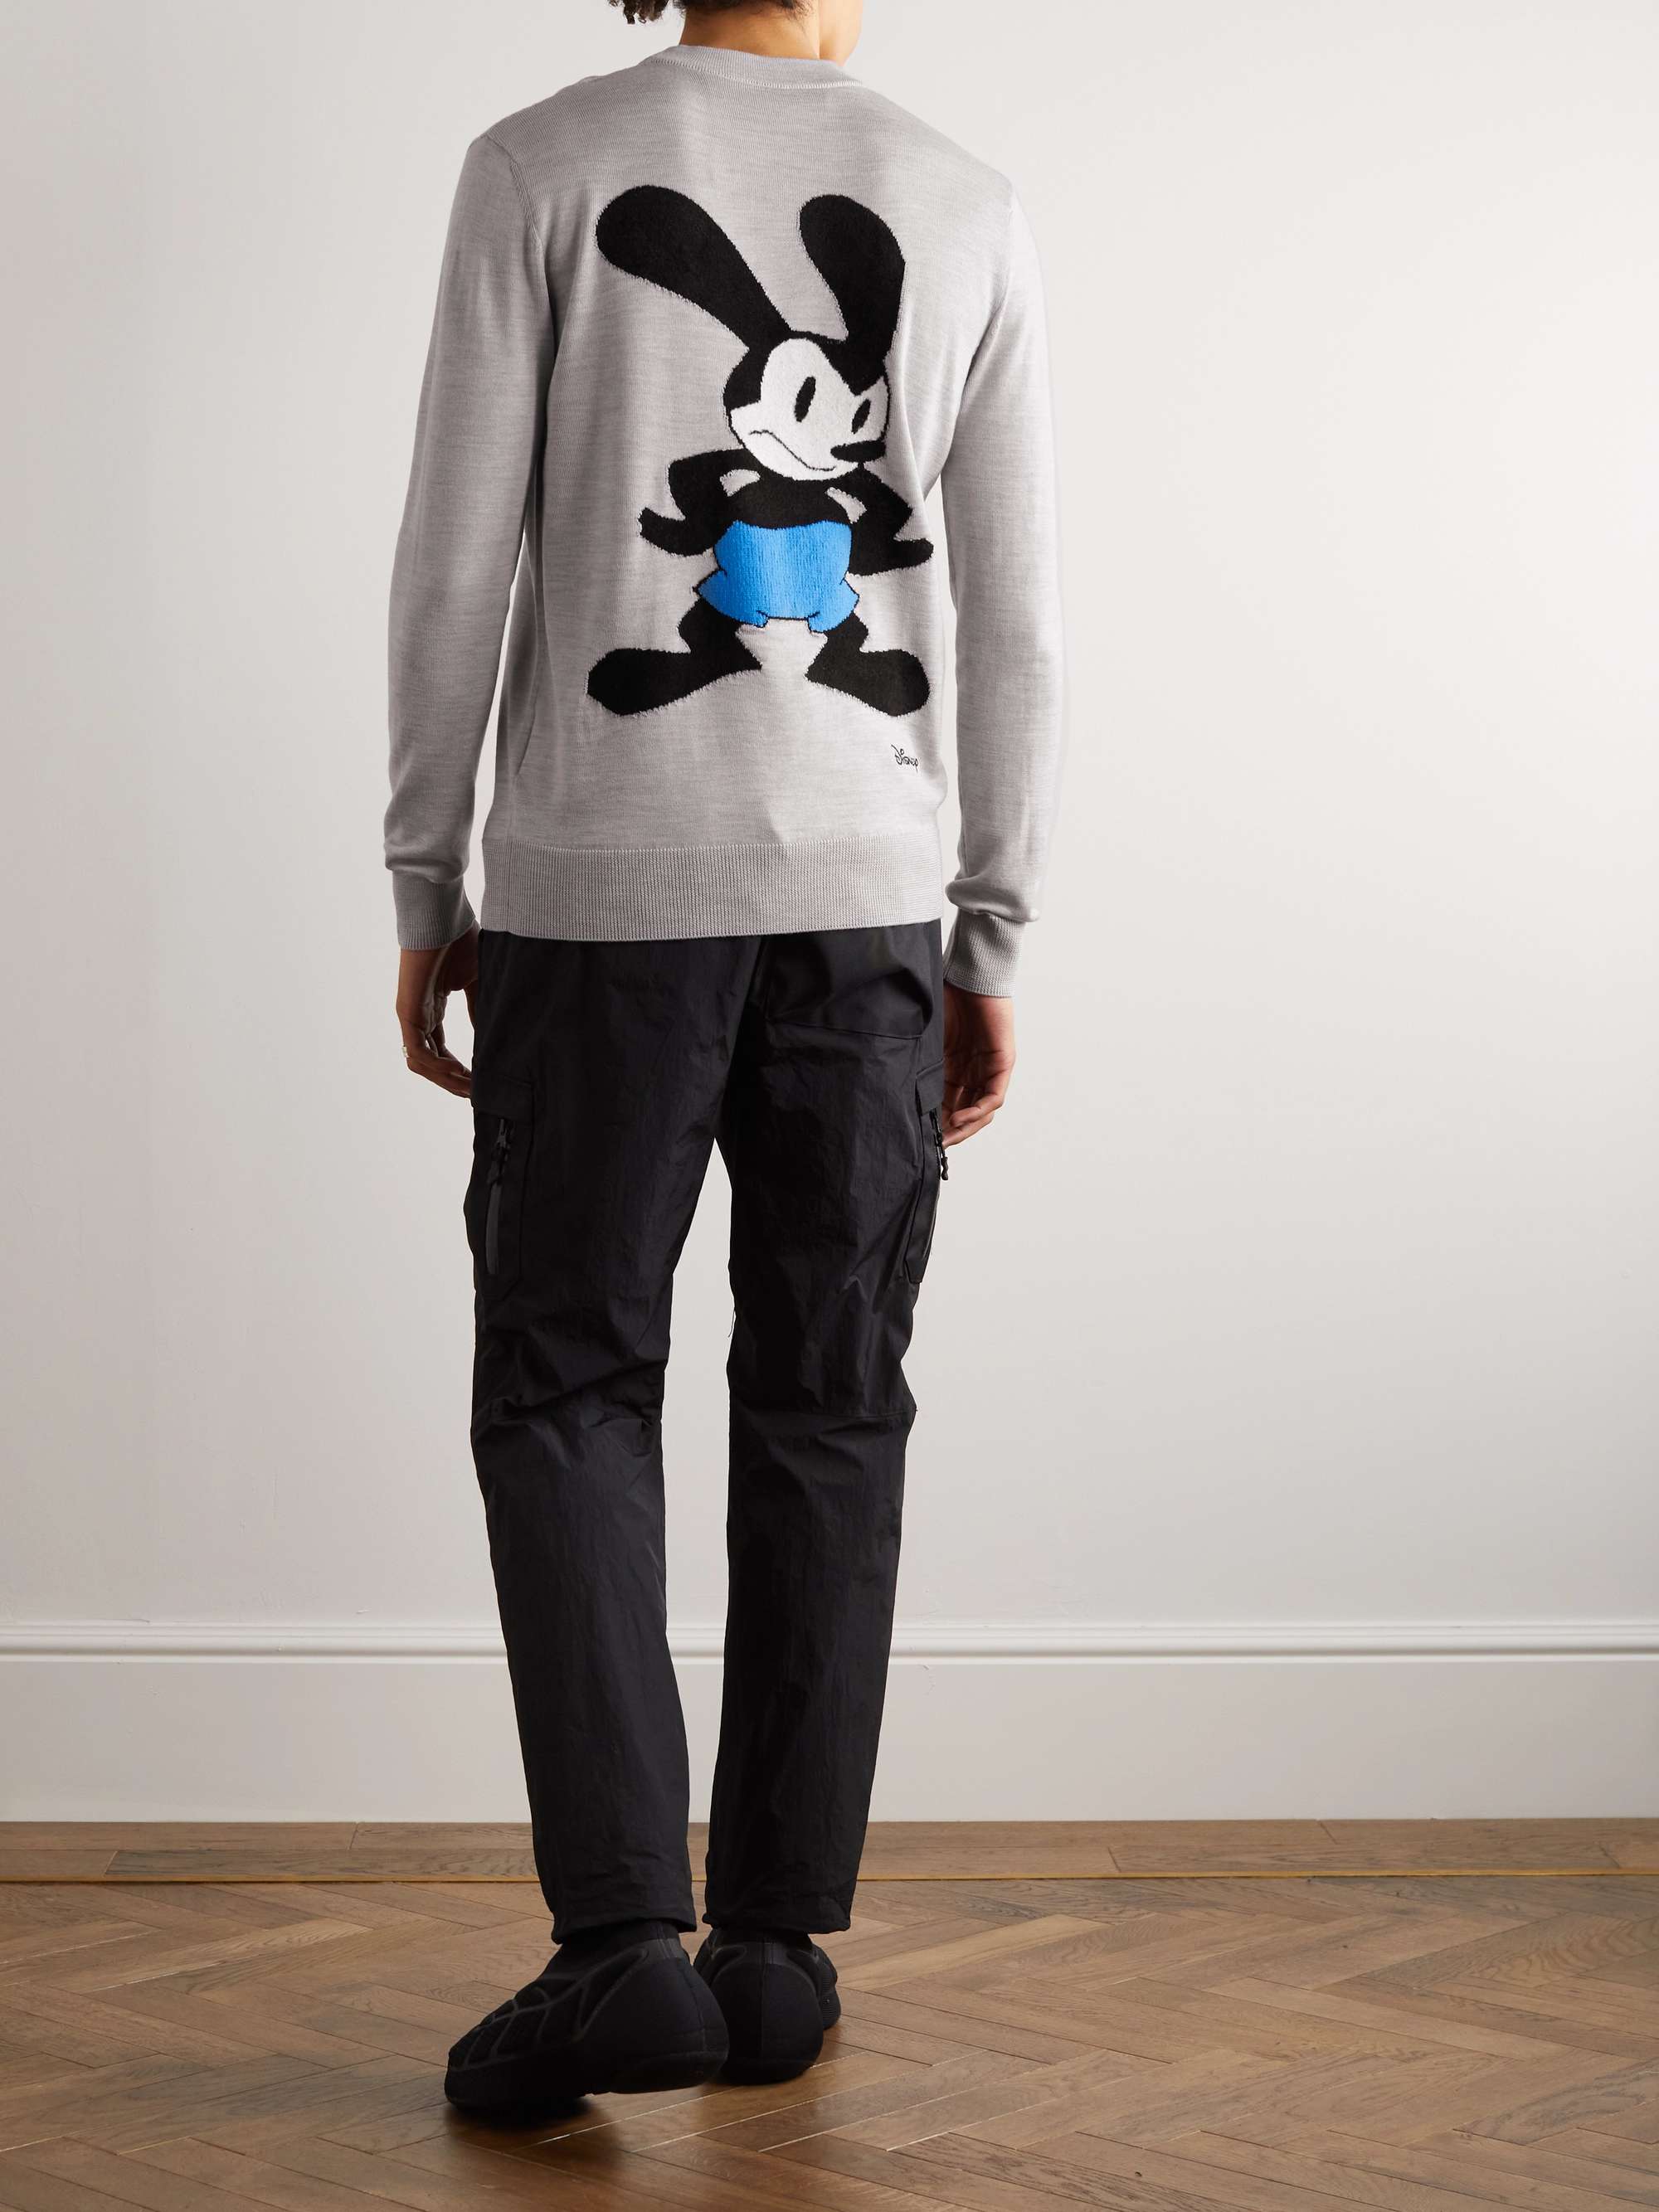 GIVENCHY + Disney Oswald Slim-Fit Intarsia Wool Sweater for Men